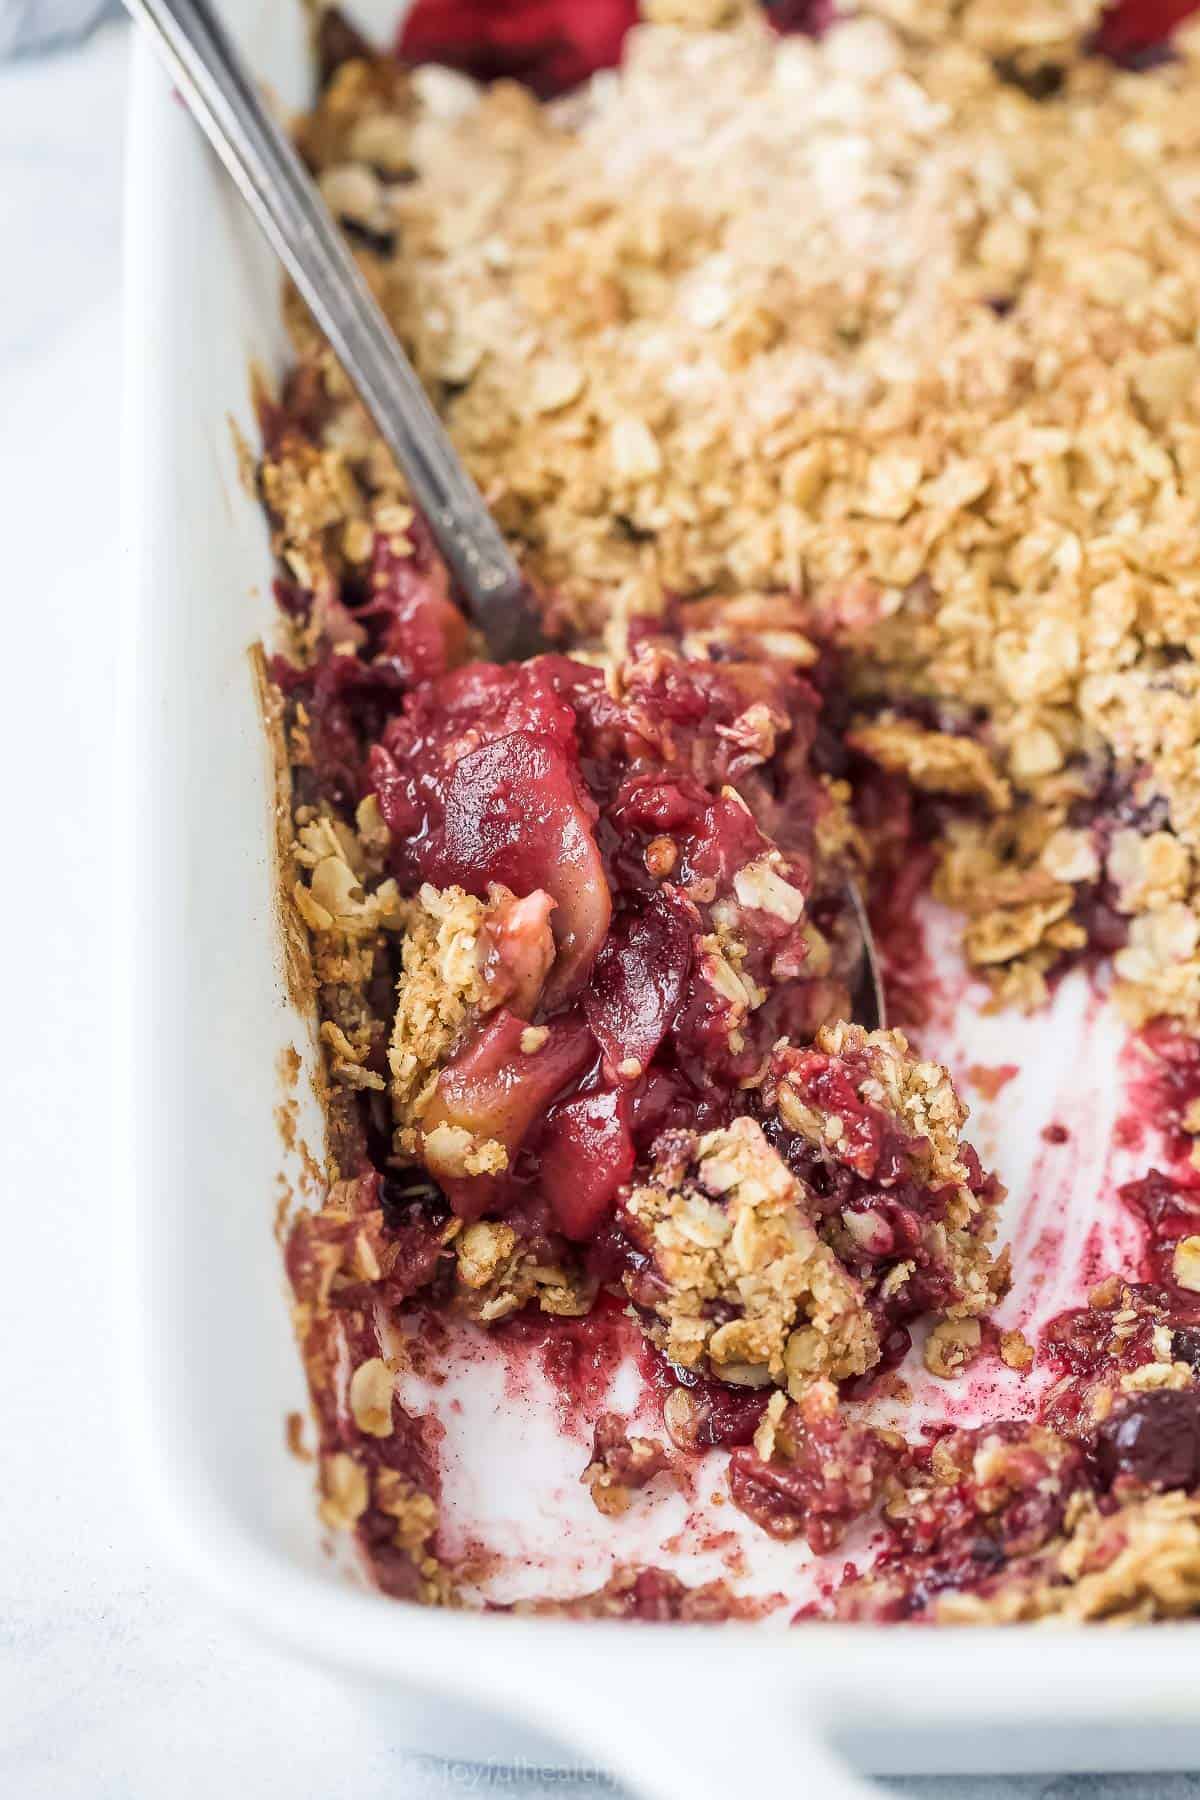 spoon scooping apple blueberry crumble from a baking dish